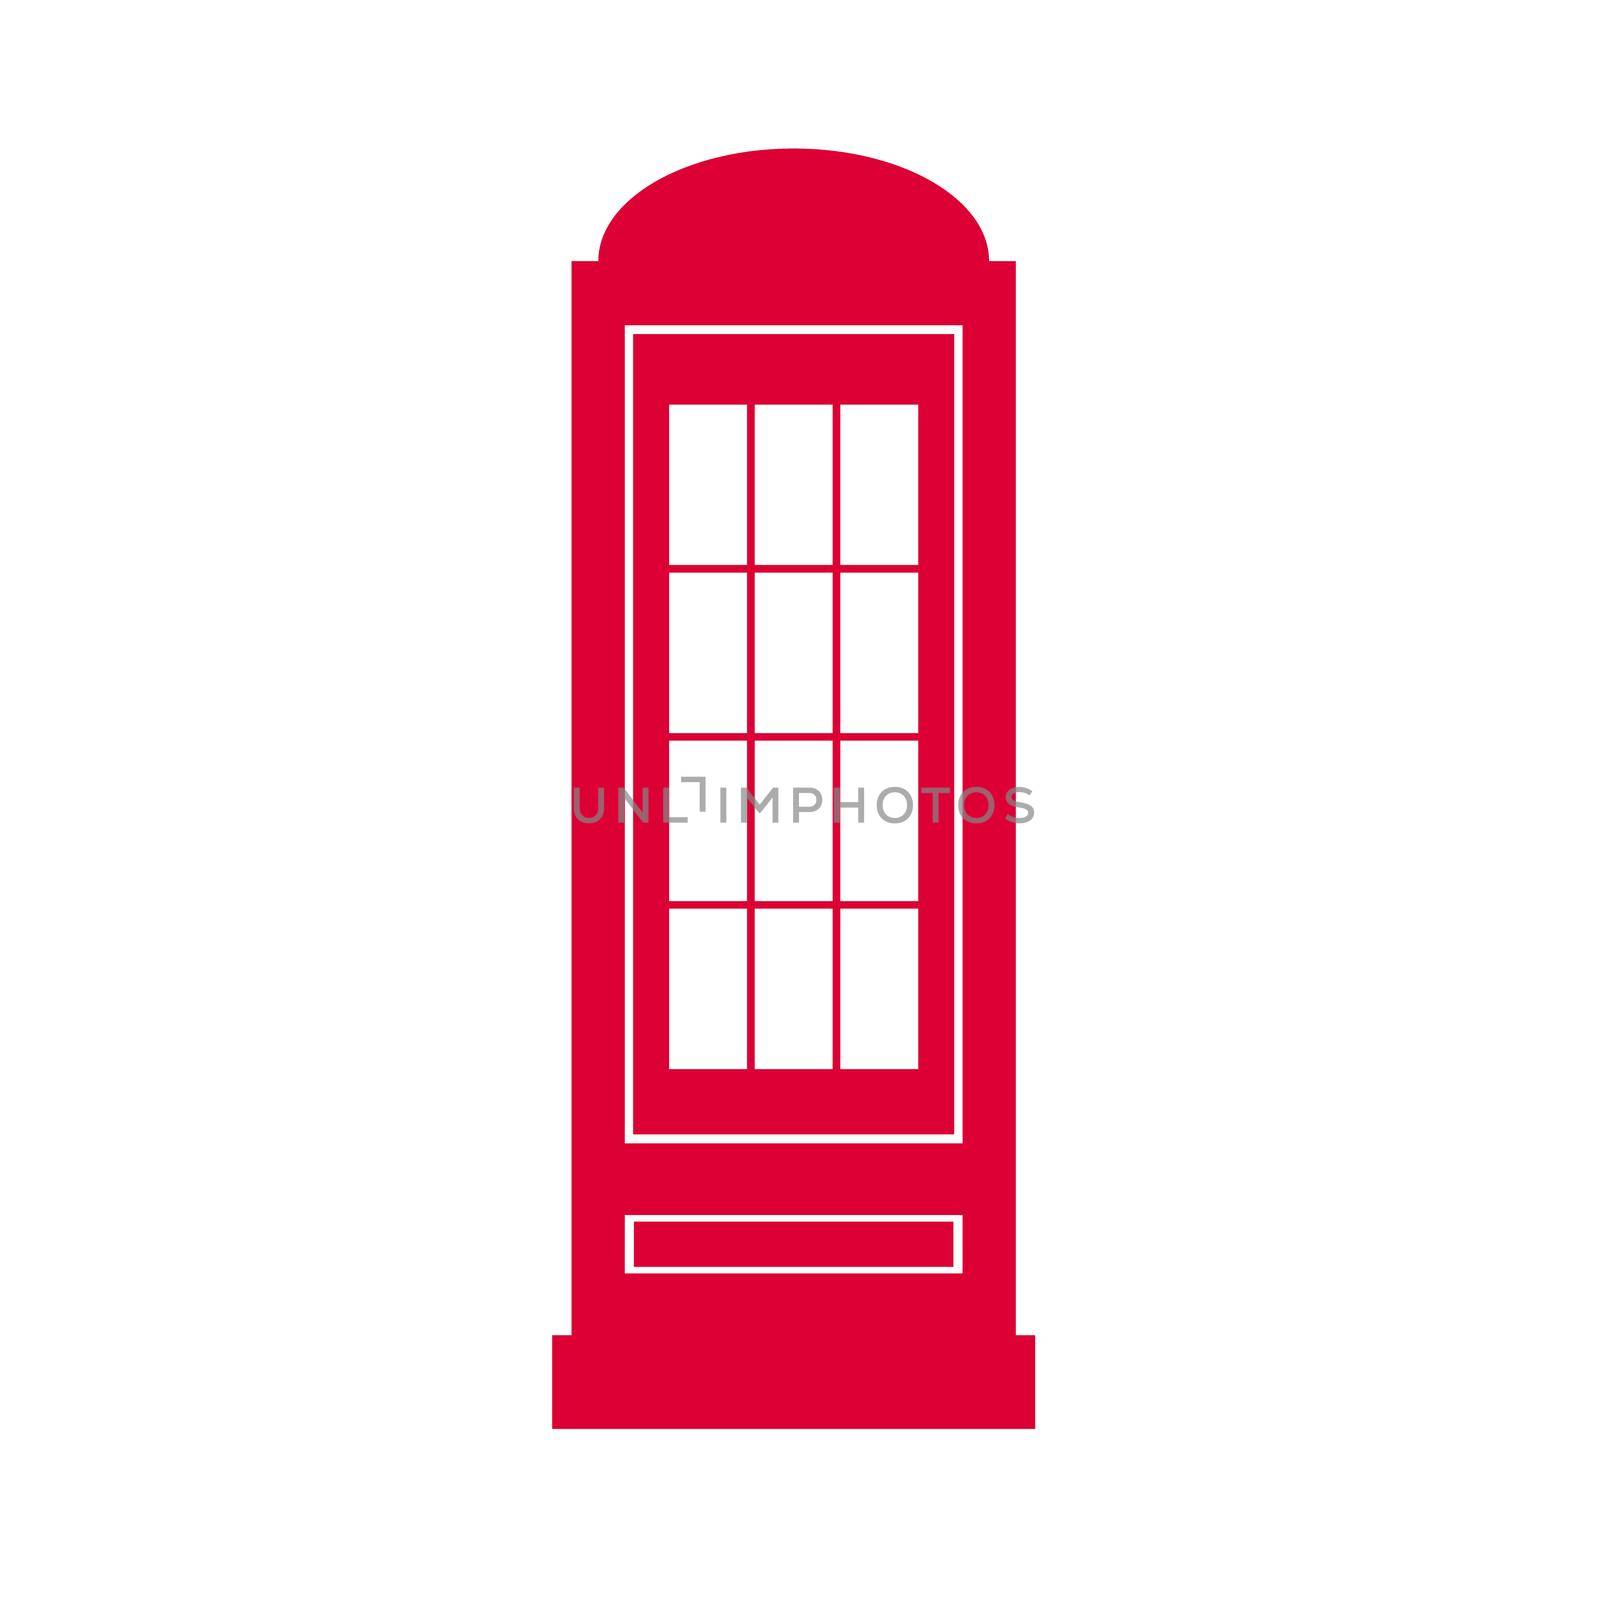 Telephone booth. Simple red icon on white by natali_brill